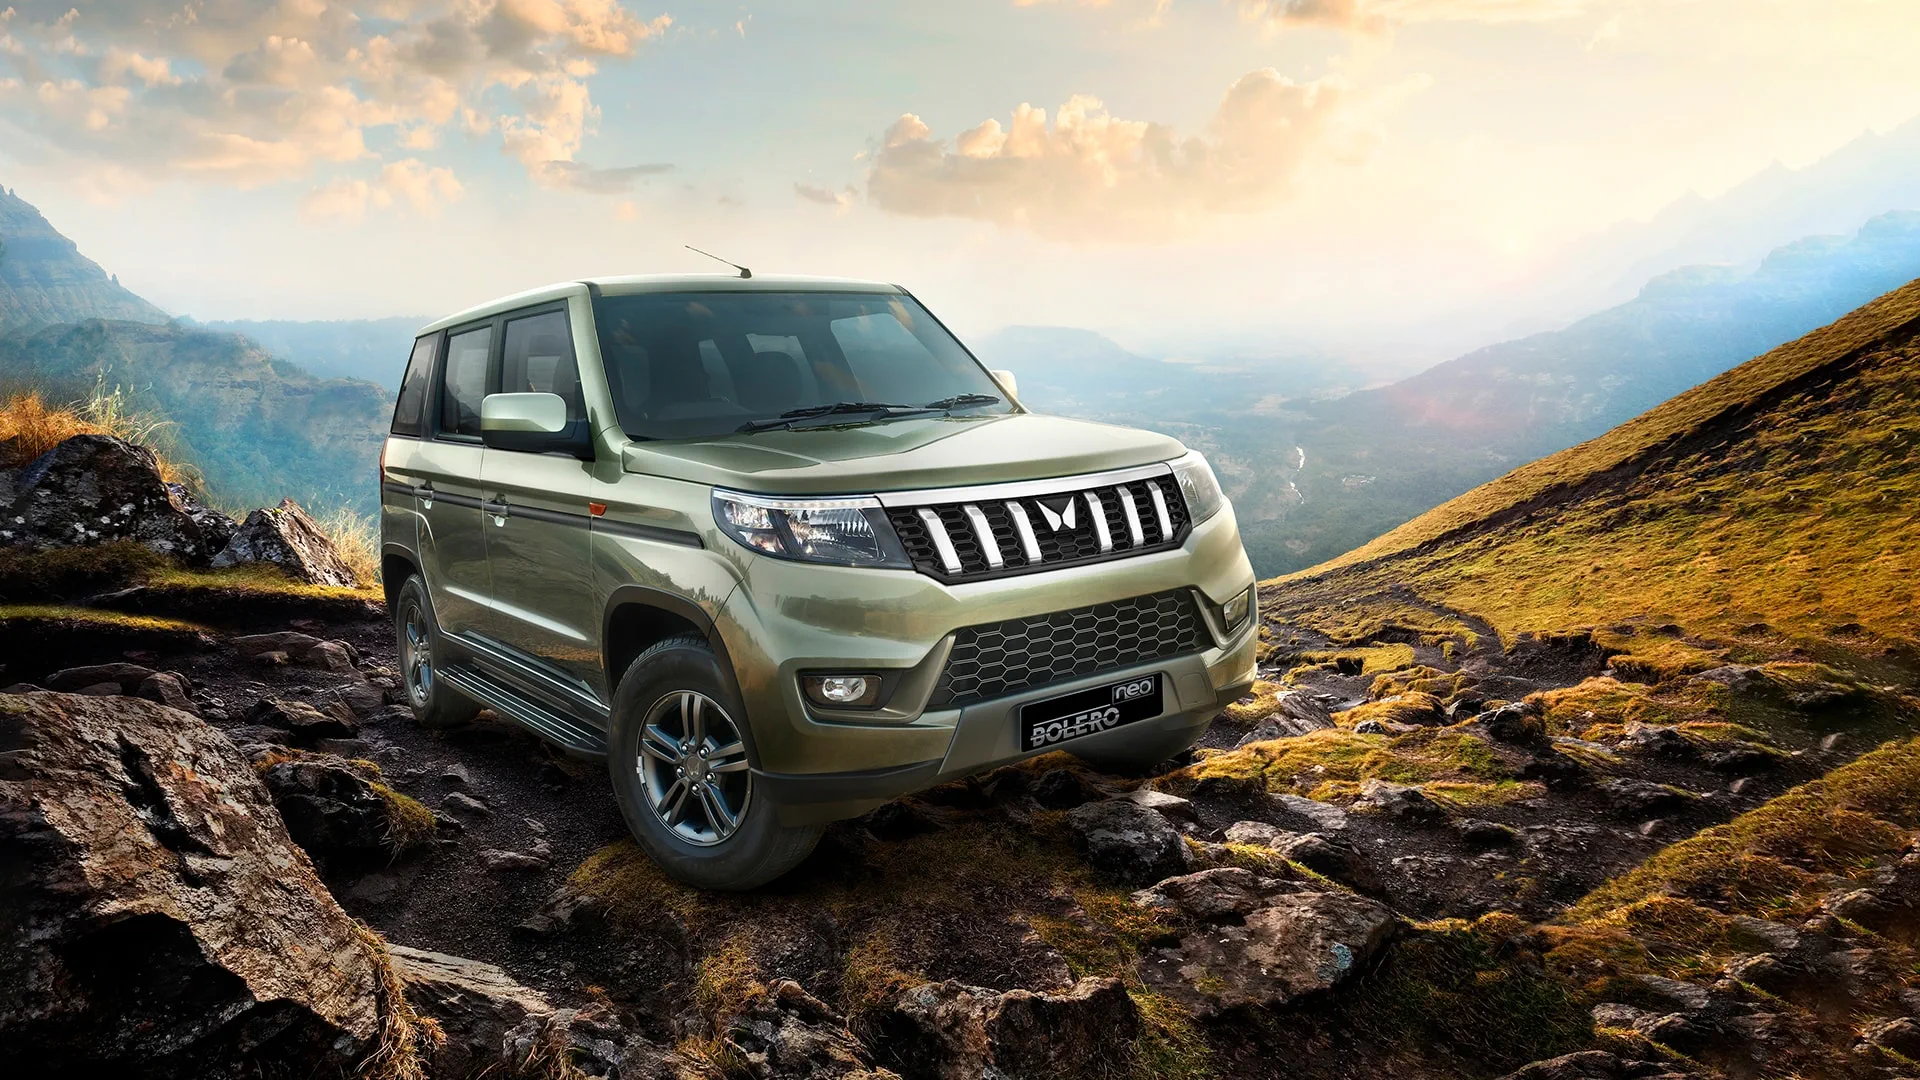 This Diwali, Mahindra is offering discounts of up to ₹3.5 lakh on their popular SUVs. Get all the details here